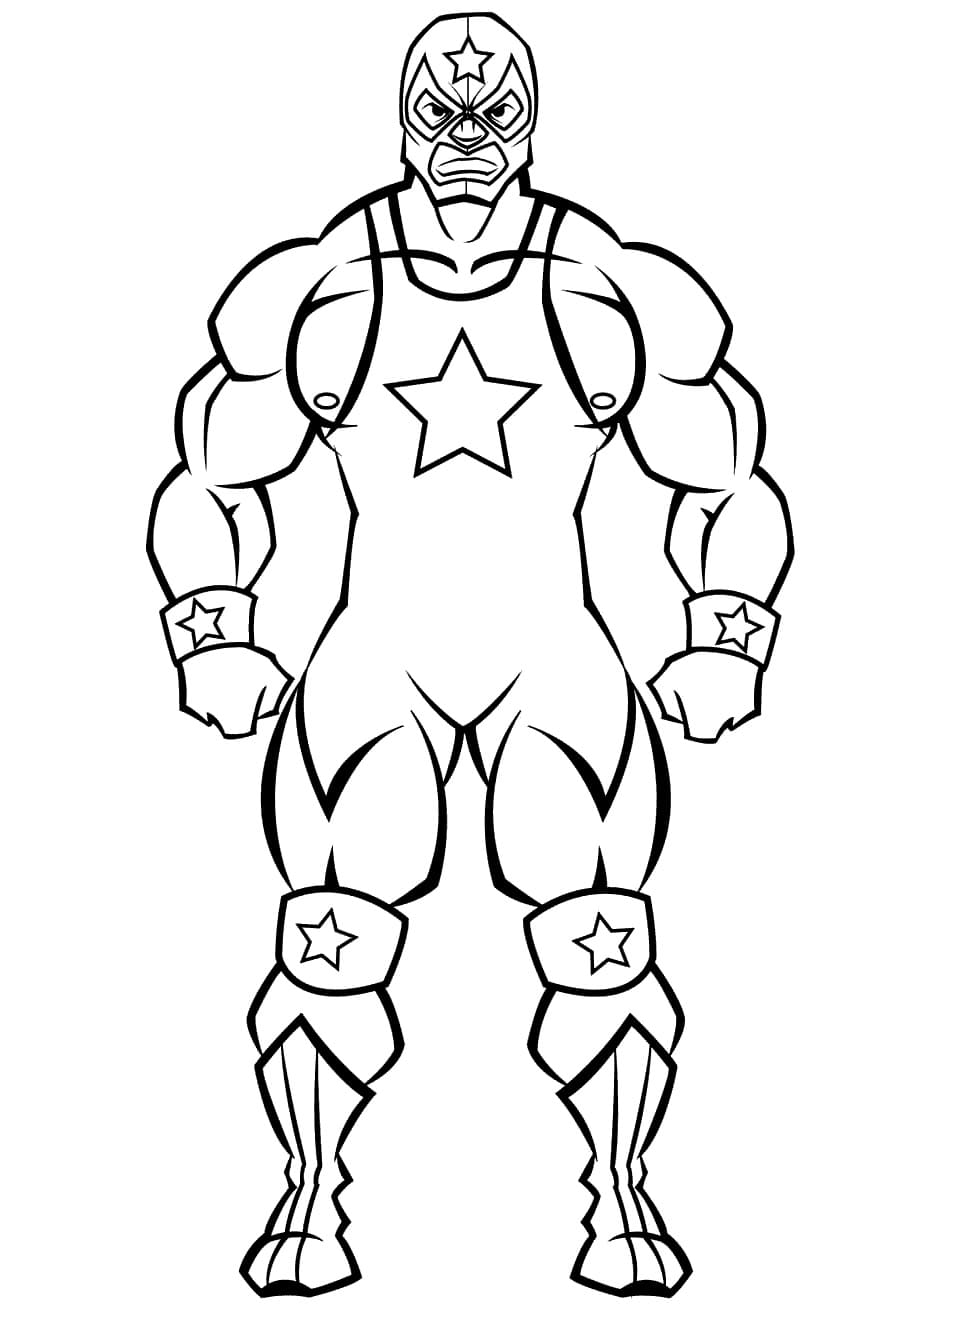 Strong Wrestler coloring page - Download, Print or Color Online for Free